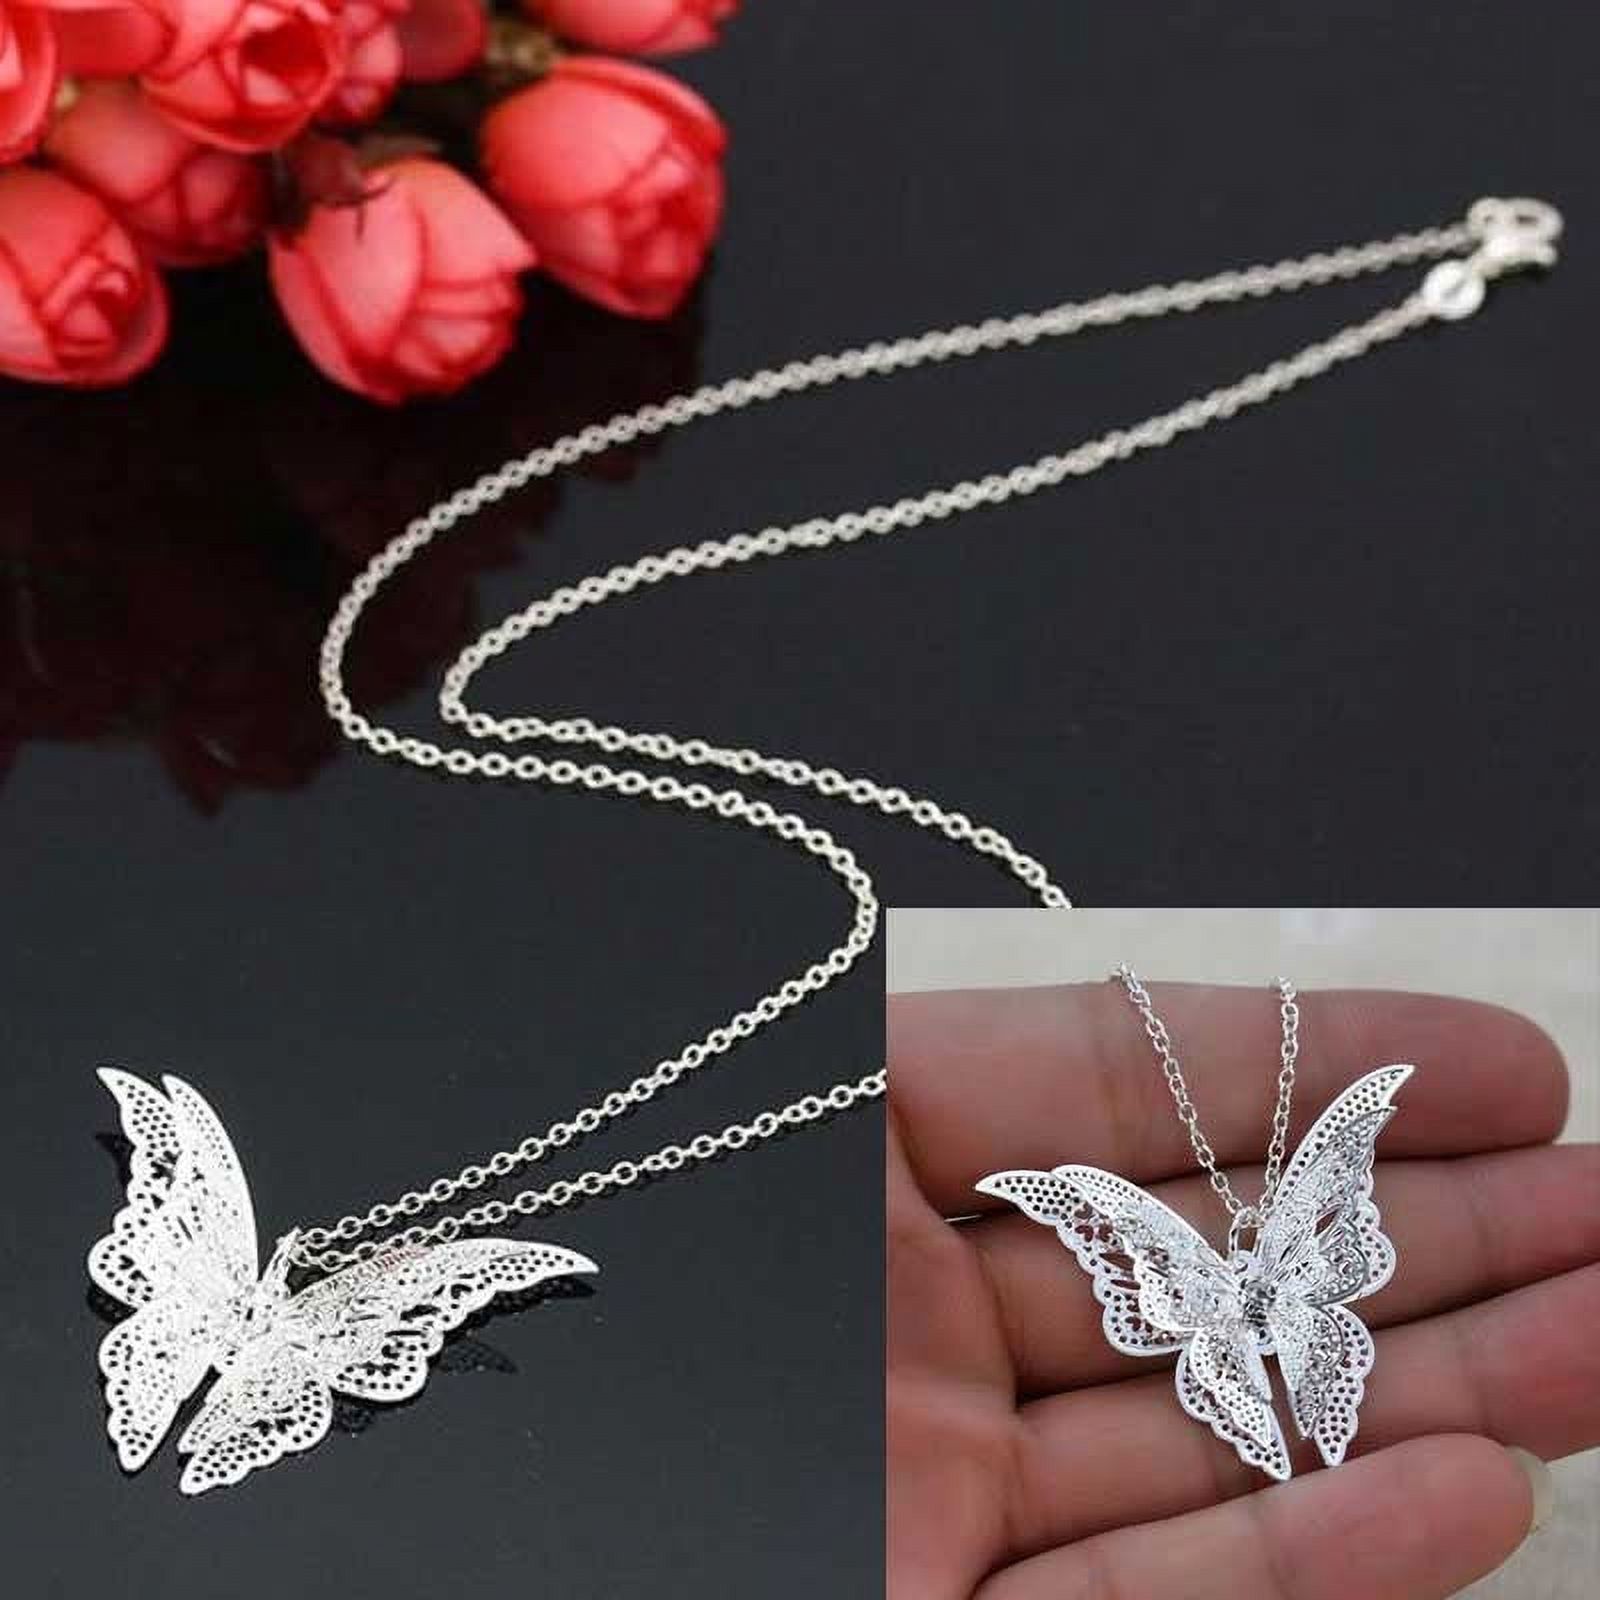 Deals of the Day,Jovati Women Pendant Lovely Silver Butterfly Pendant Chain Necklace Alloy Jewelry Gift on Clearance - image 4 of 4